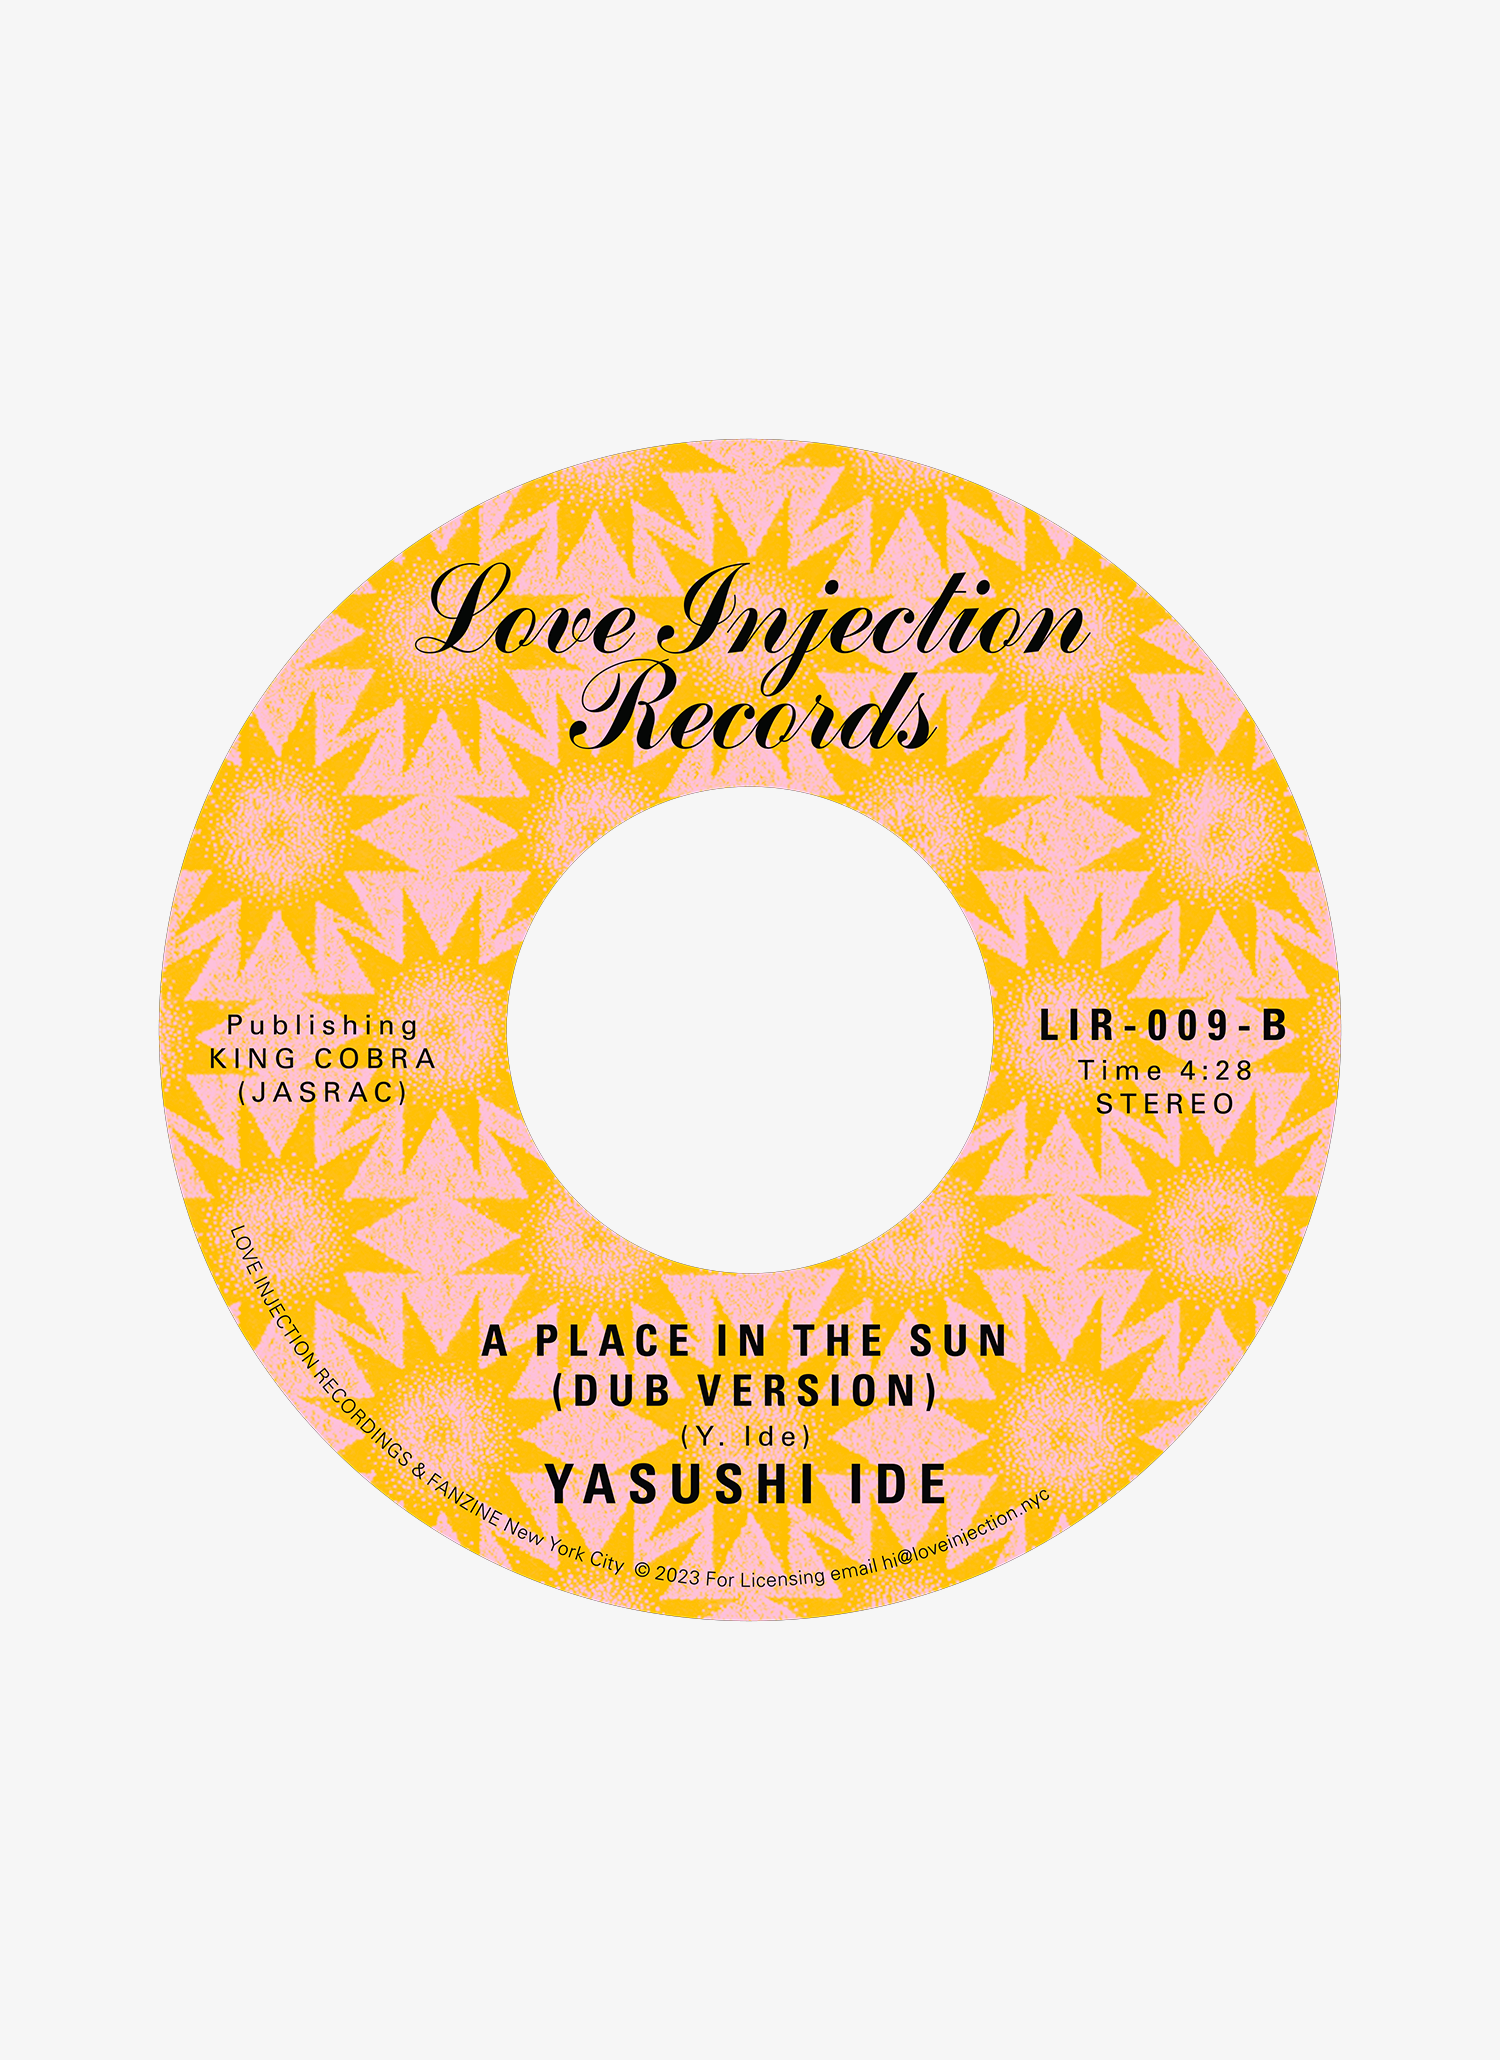 Yasushi Ide - A Place In The Sun (Dub Version) (Love Injection Records)